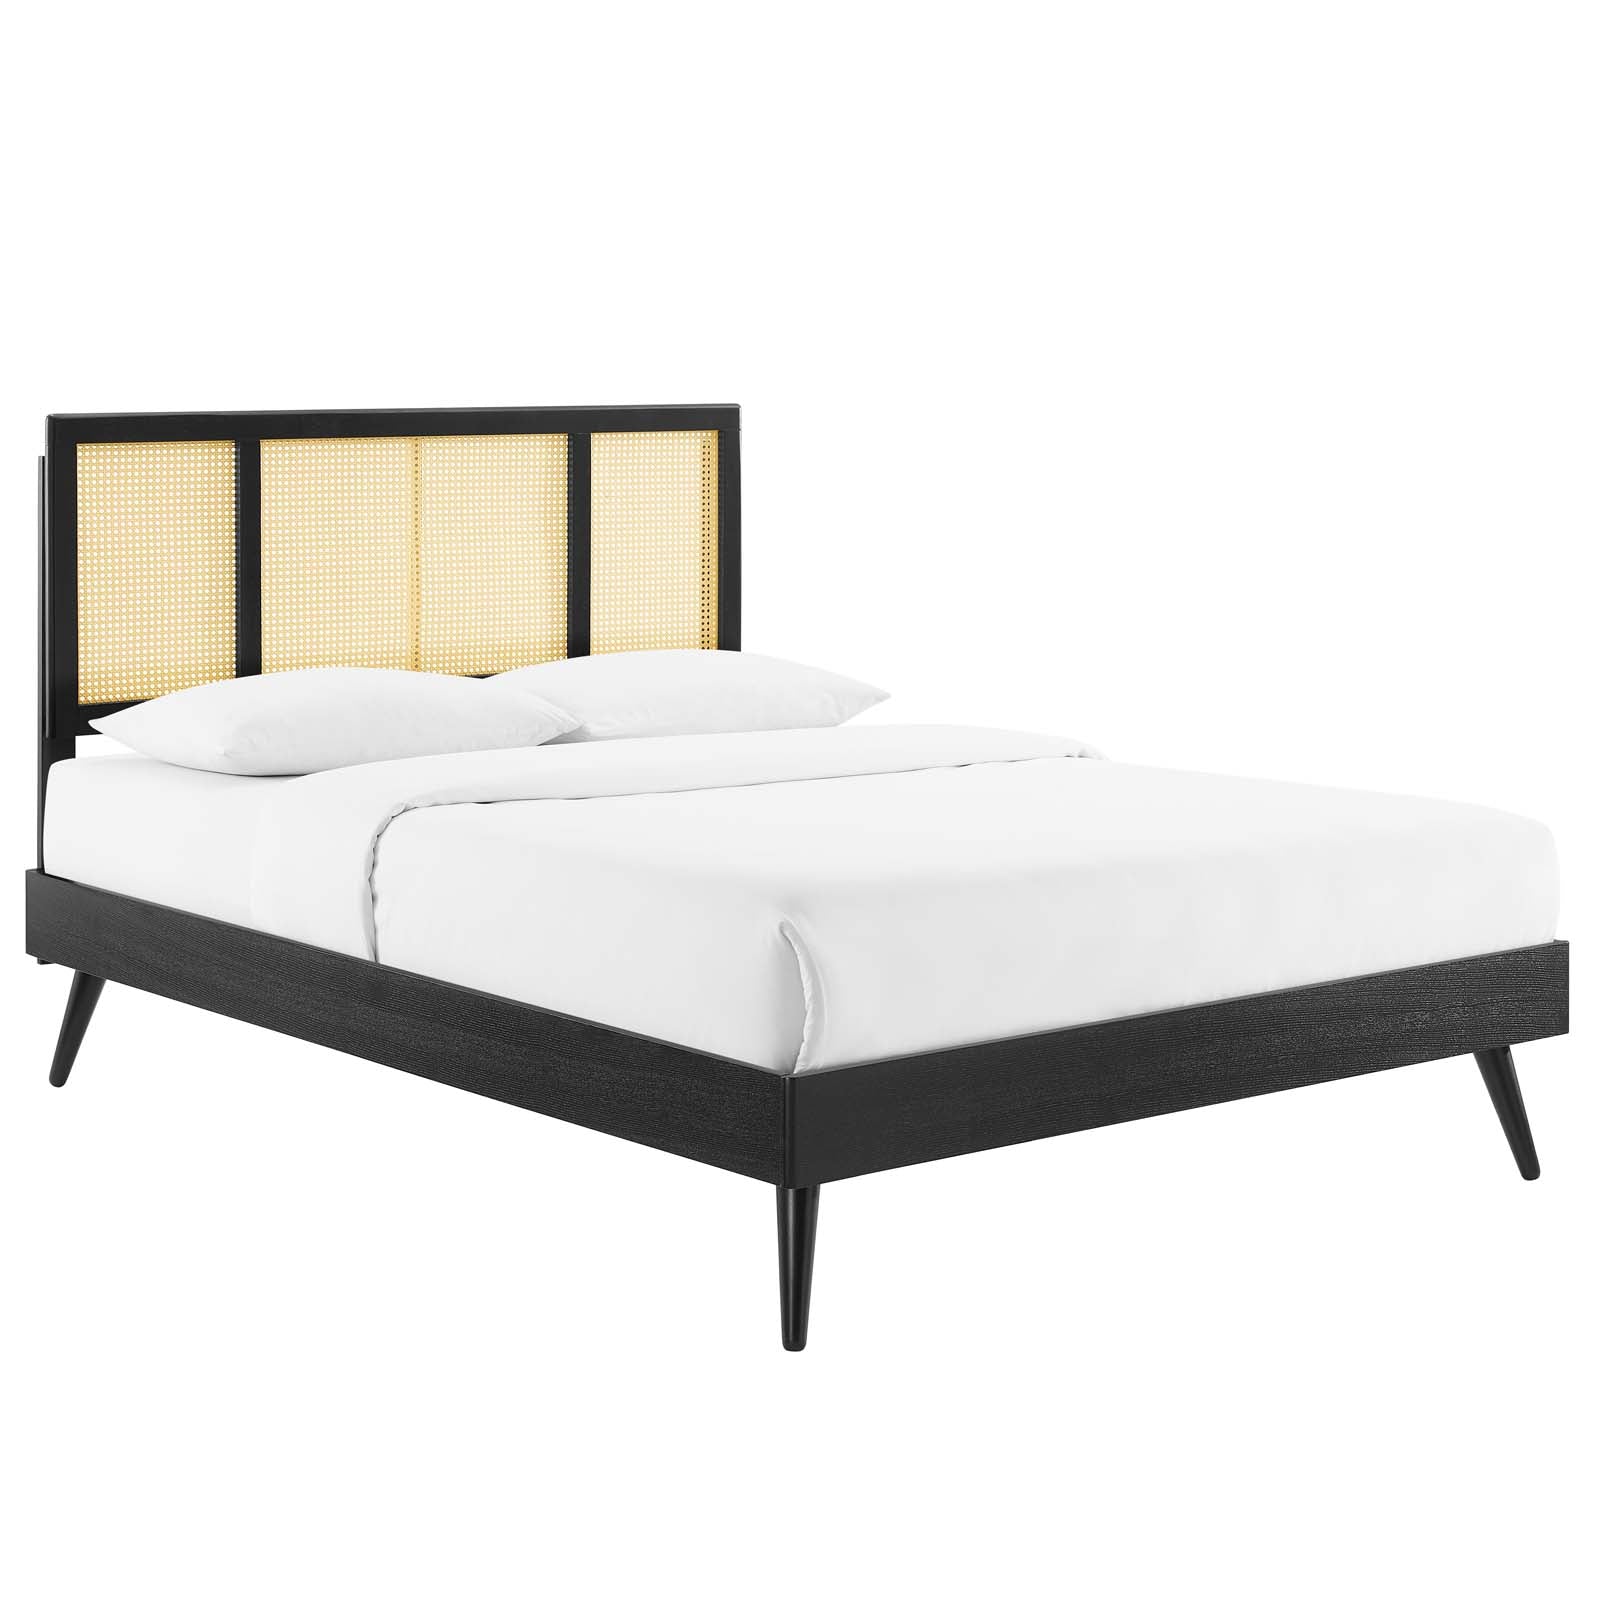 Modway Beds - Kelsea-Cane-and-Wood-Full-Platform-Bed-With-Splayed-Legs-Black